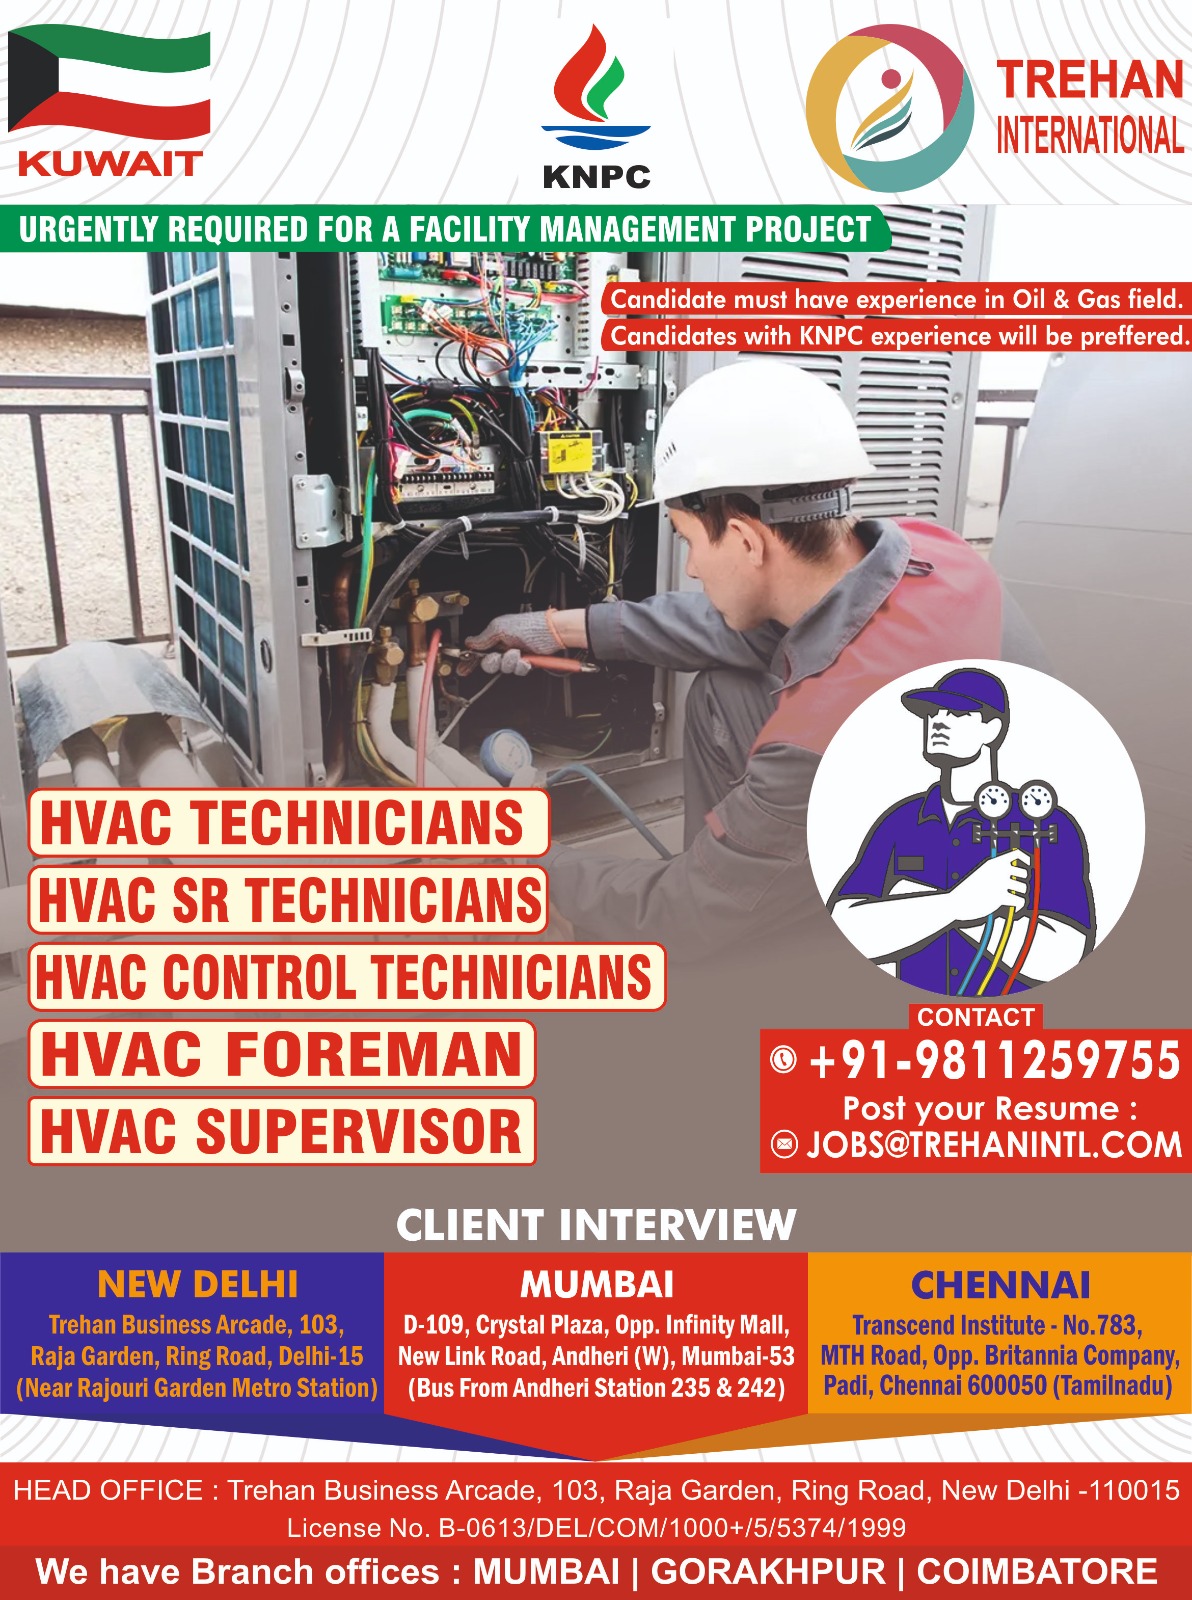 Urgent Requirement for HVAC Technician- KNPC Project in Kuwait